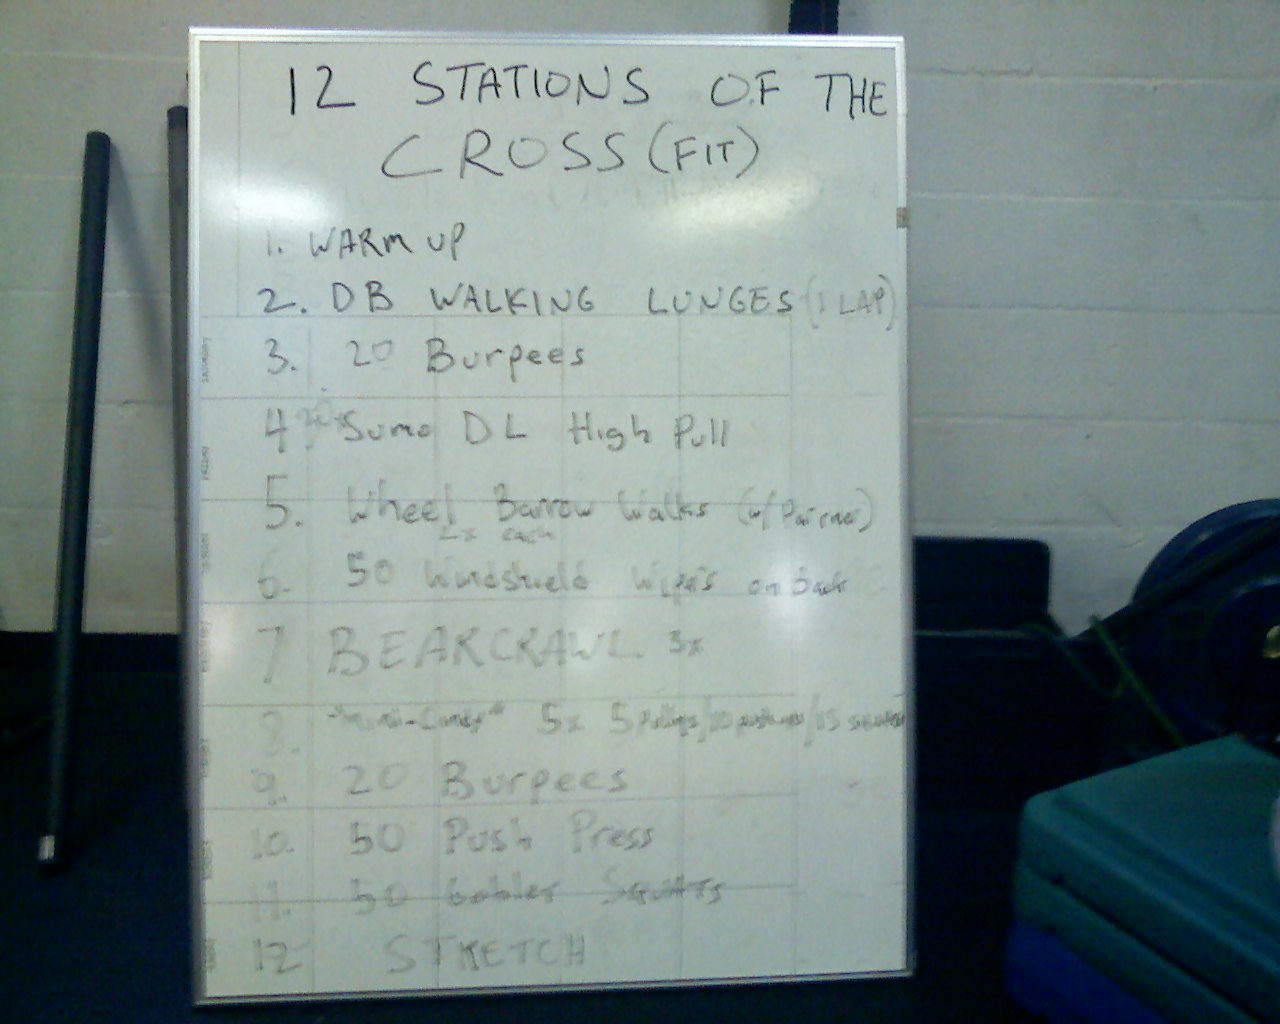 [stations+of+the+crossfit.jpg]